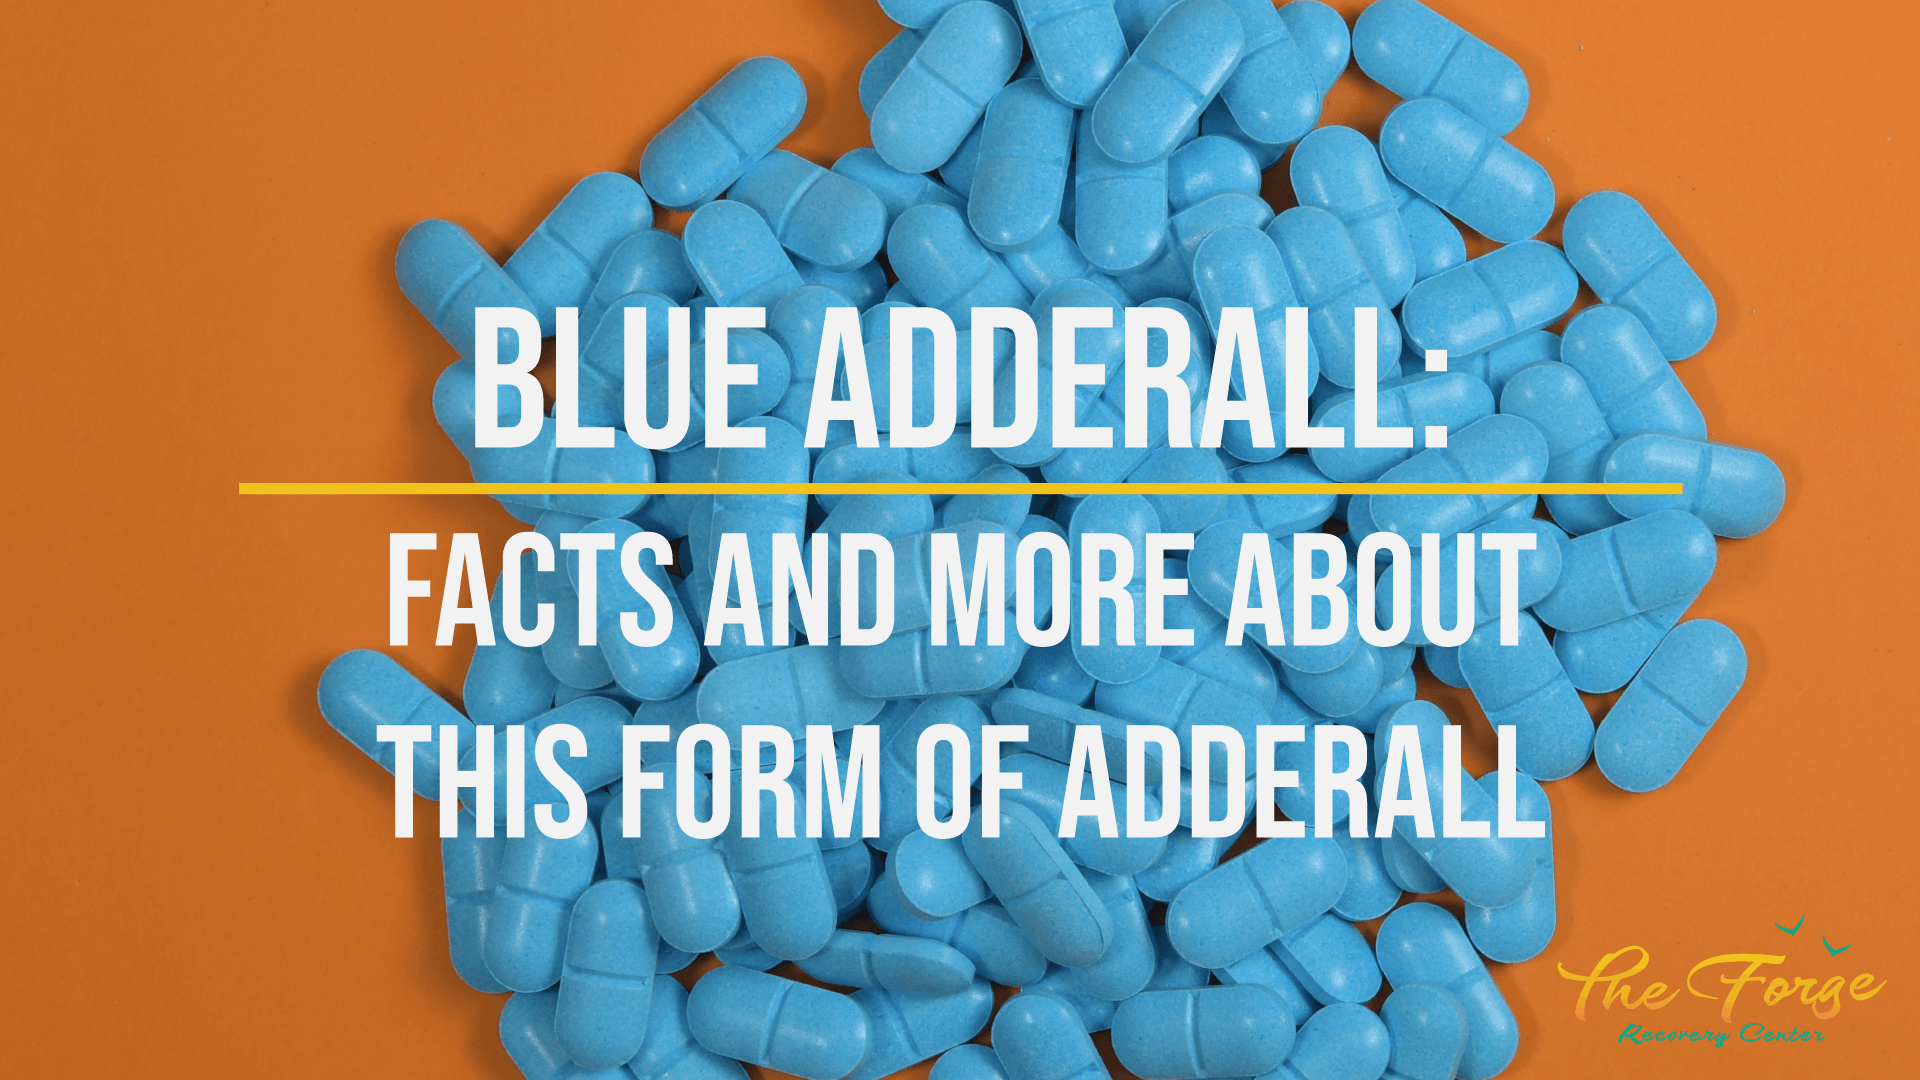 Blue Adderall Pill: Facts and More About this Form of Adderall